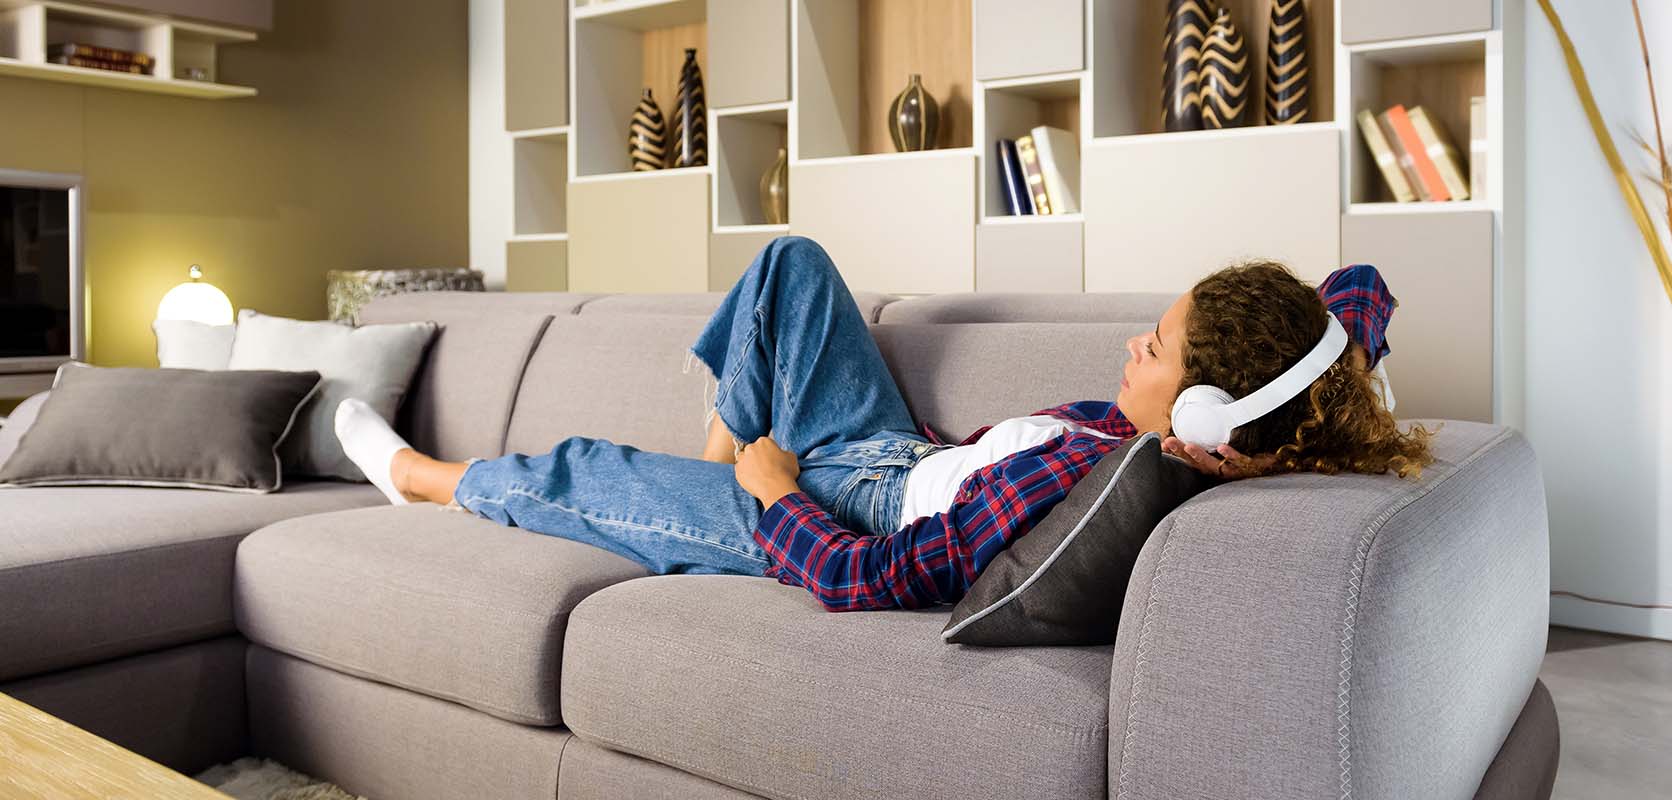 female relaxing on sofa at home with headphones on after buying weed online from Low Price Bud mail order marijuana dispensary Canada.